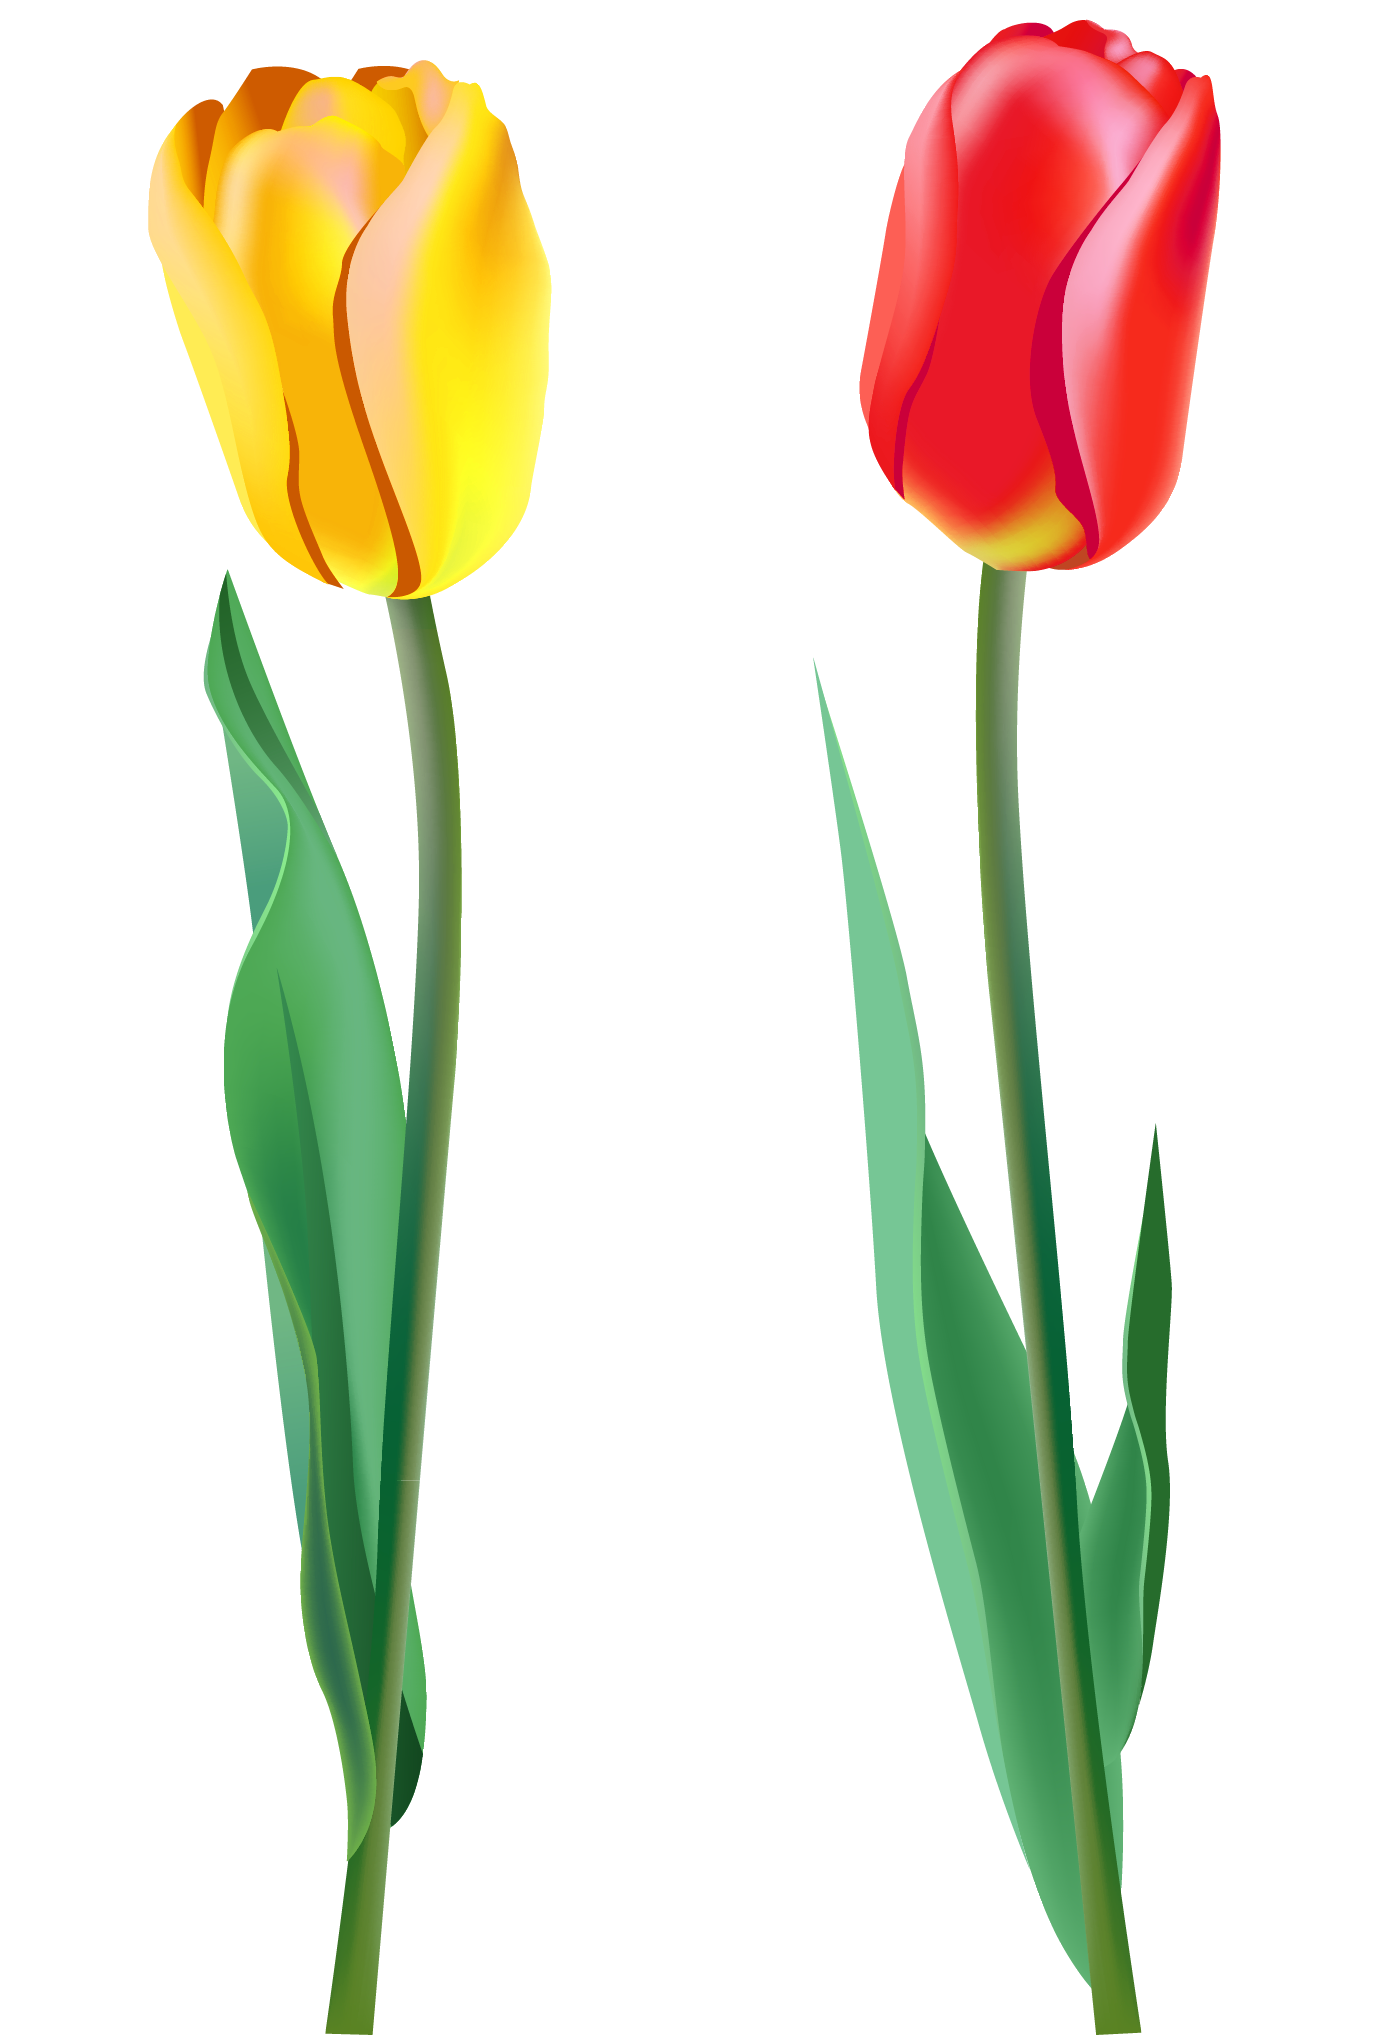 Tulip Png Image - Tulip, Transparent background PNG HD thumbnail